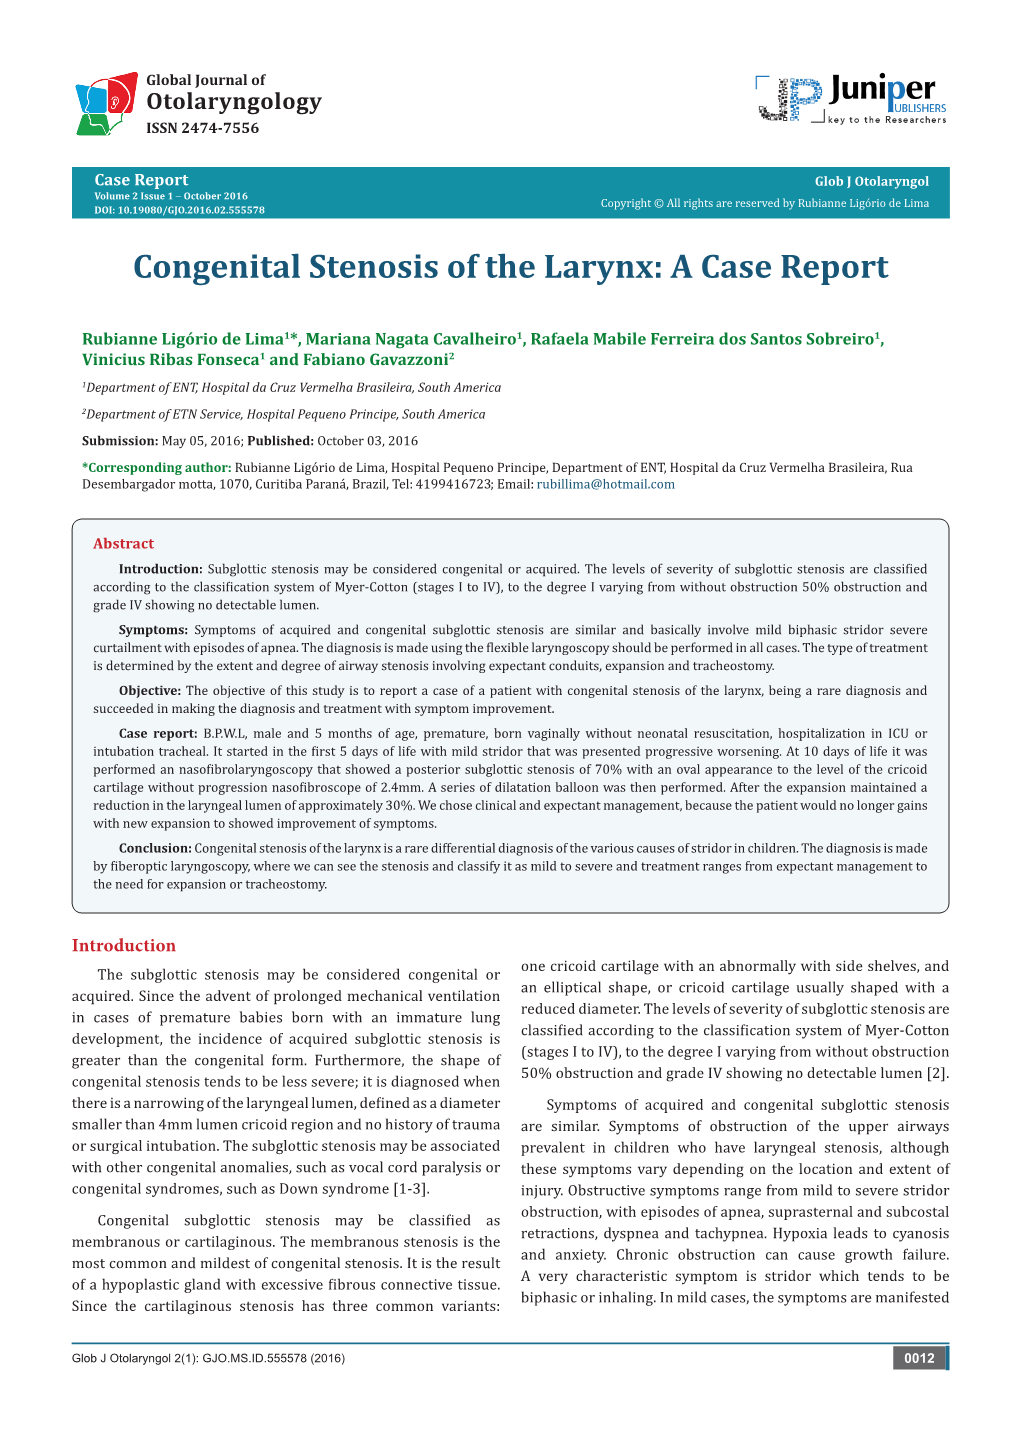 Congenital Stenosis of the Larynx: a Case Report